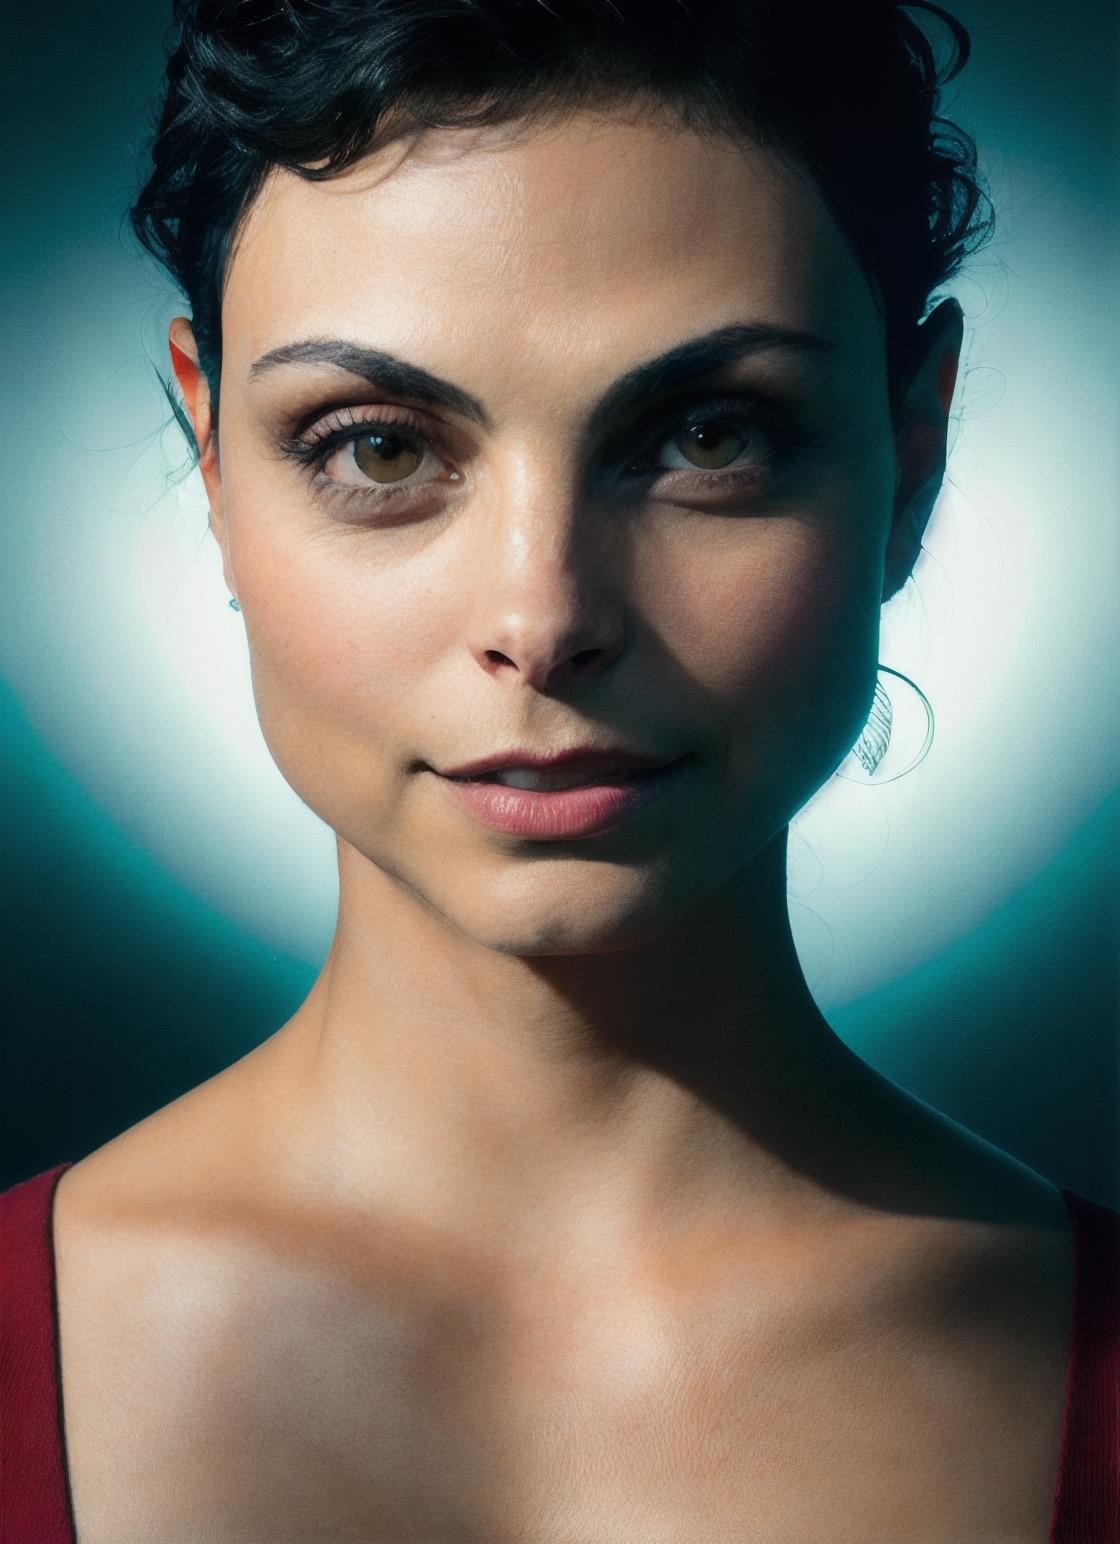 Morena Baccarin image by astragartist